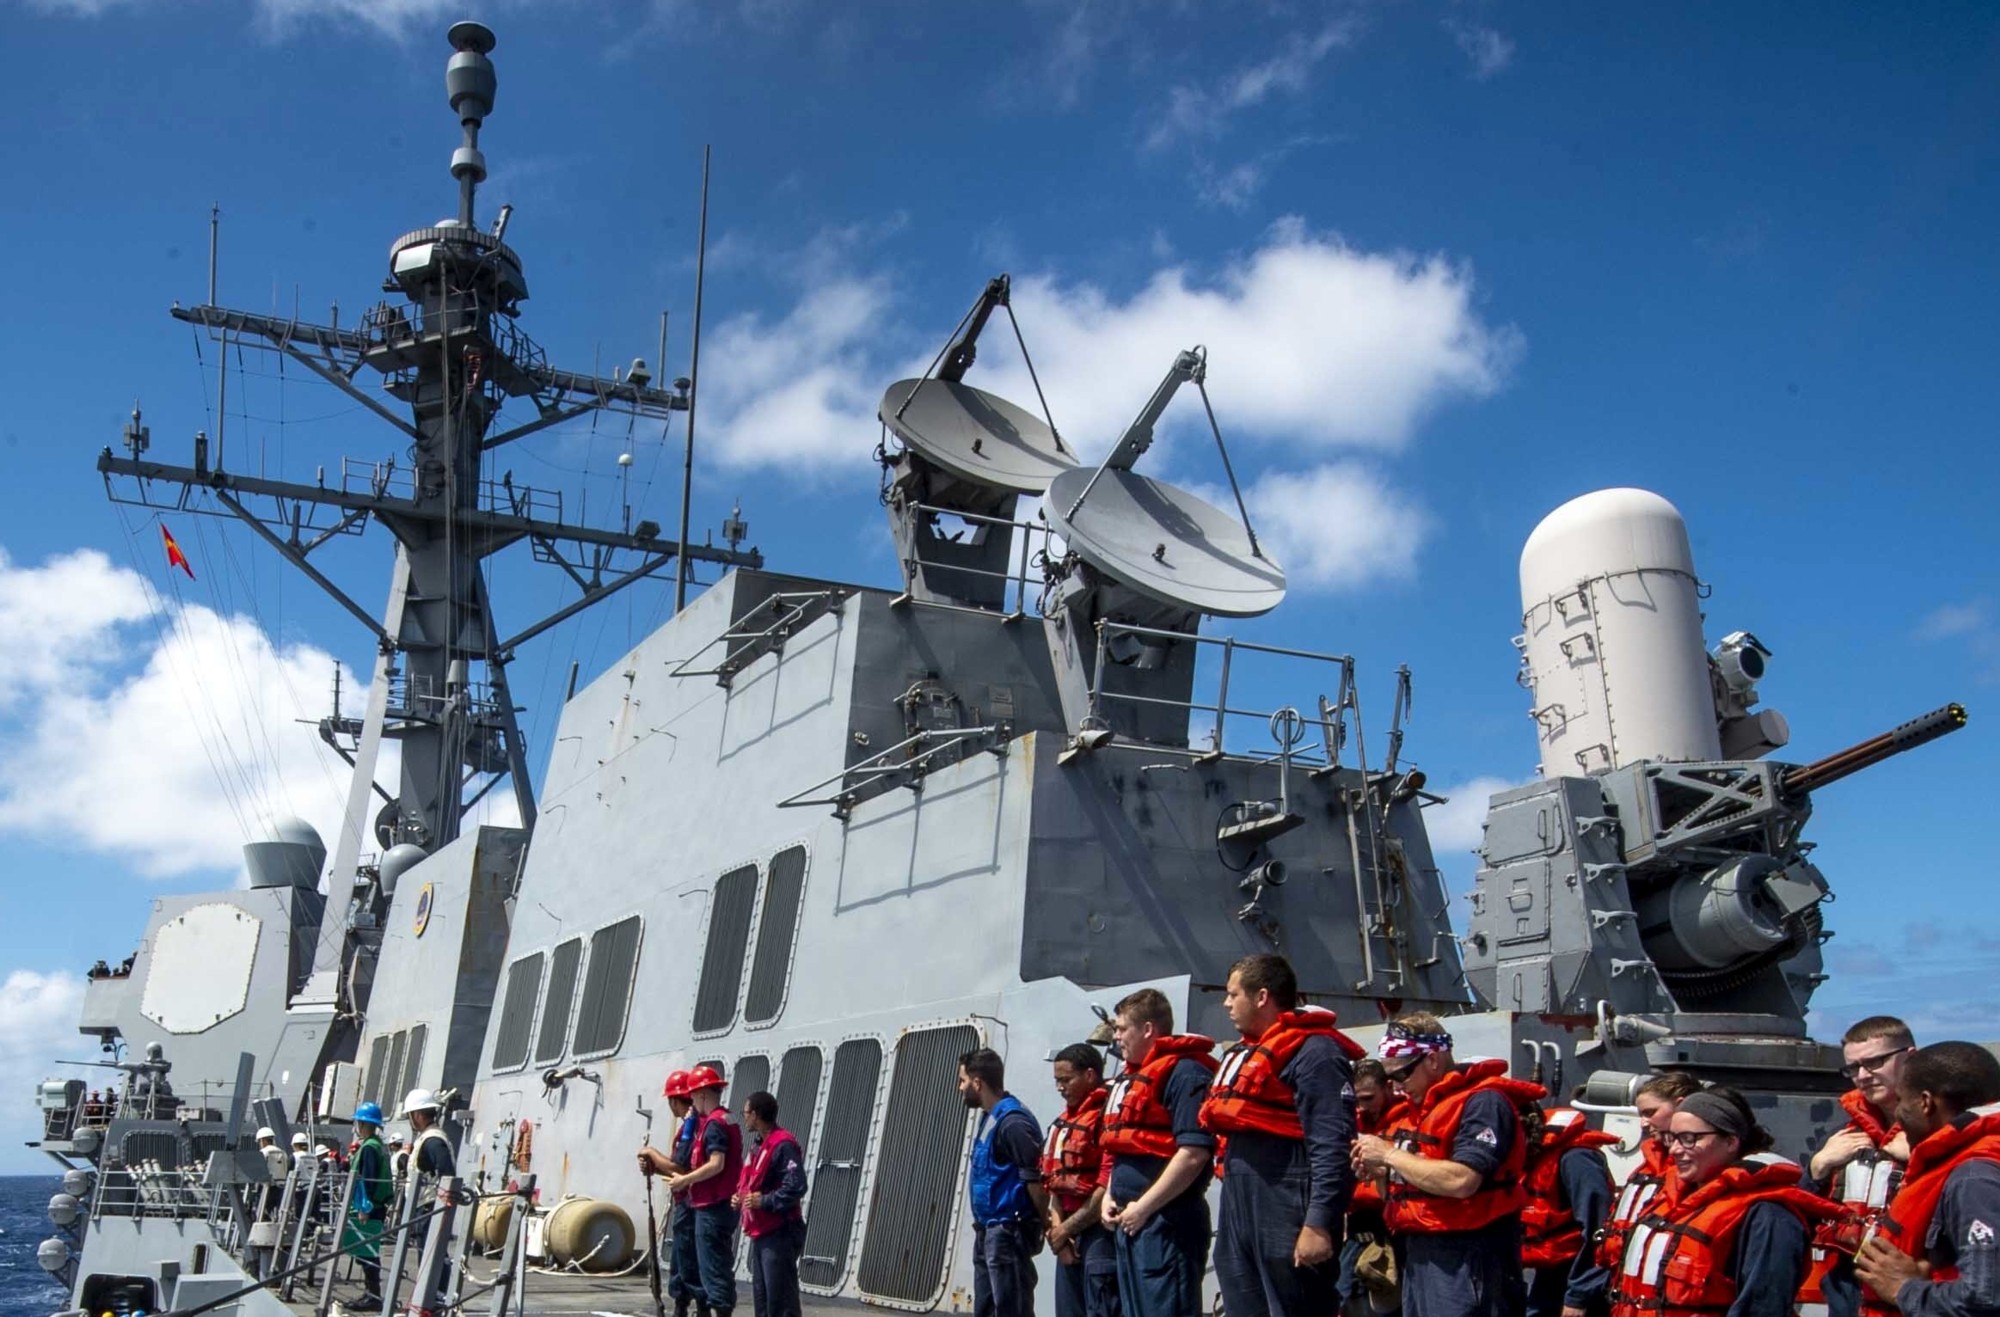 ddg-110 uss william p. lawrence arleigh burke class guided missile destroyer aegis us navy philippine sea 55